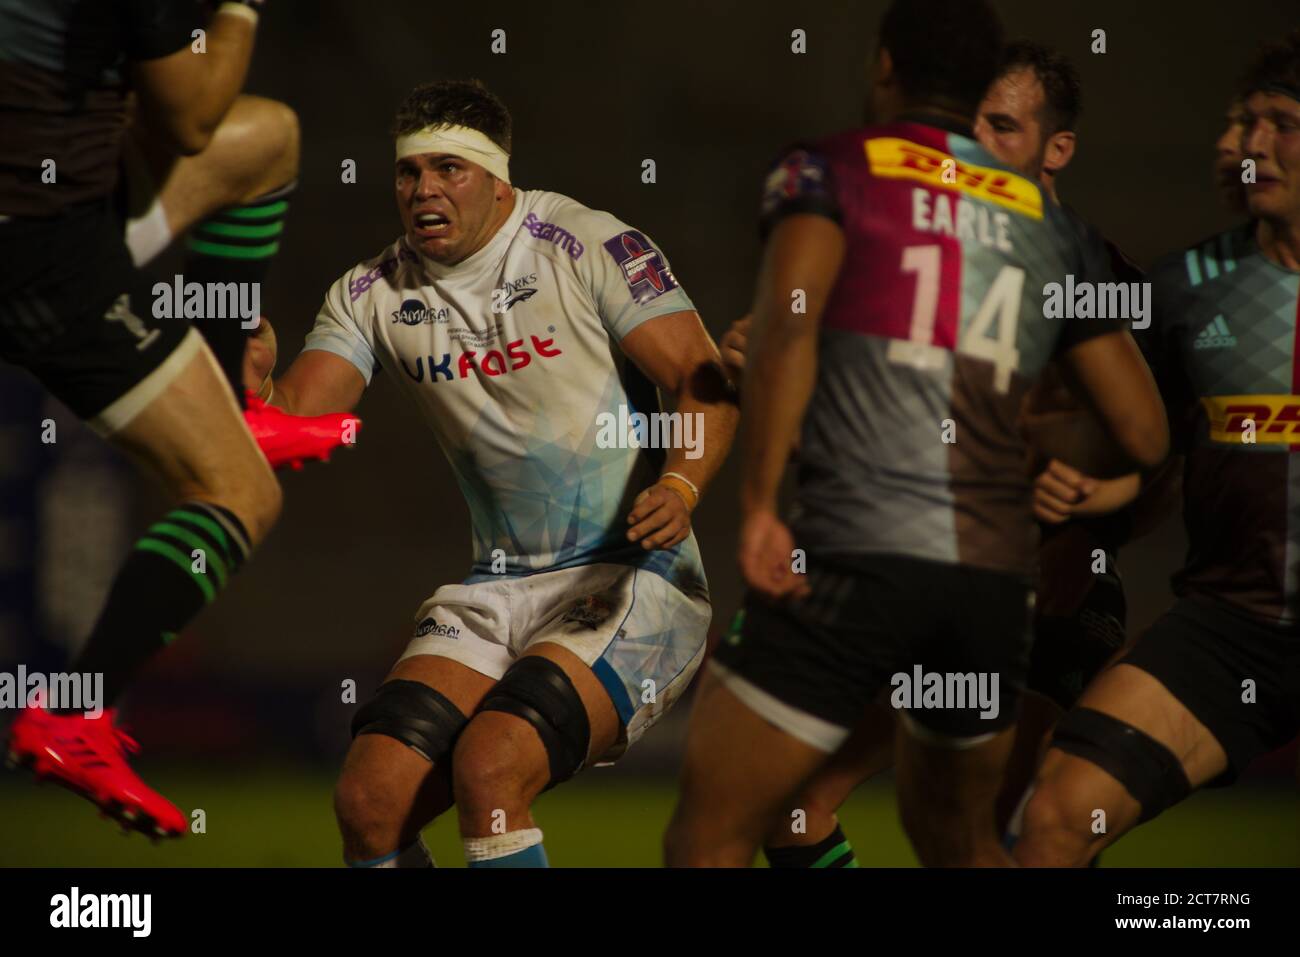 Manchester, England, 21 September 2020. Jono Ross playing for Sale Sharks against Harlequins in the Premiership Rugby Cup Final at the A J Bell Stadium. Credit: Colin Edwards/Alamy Live News. Stock Photo